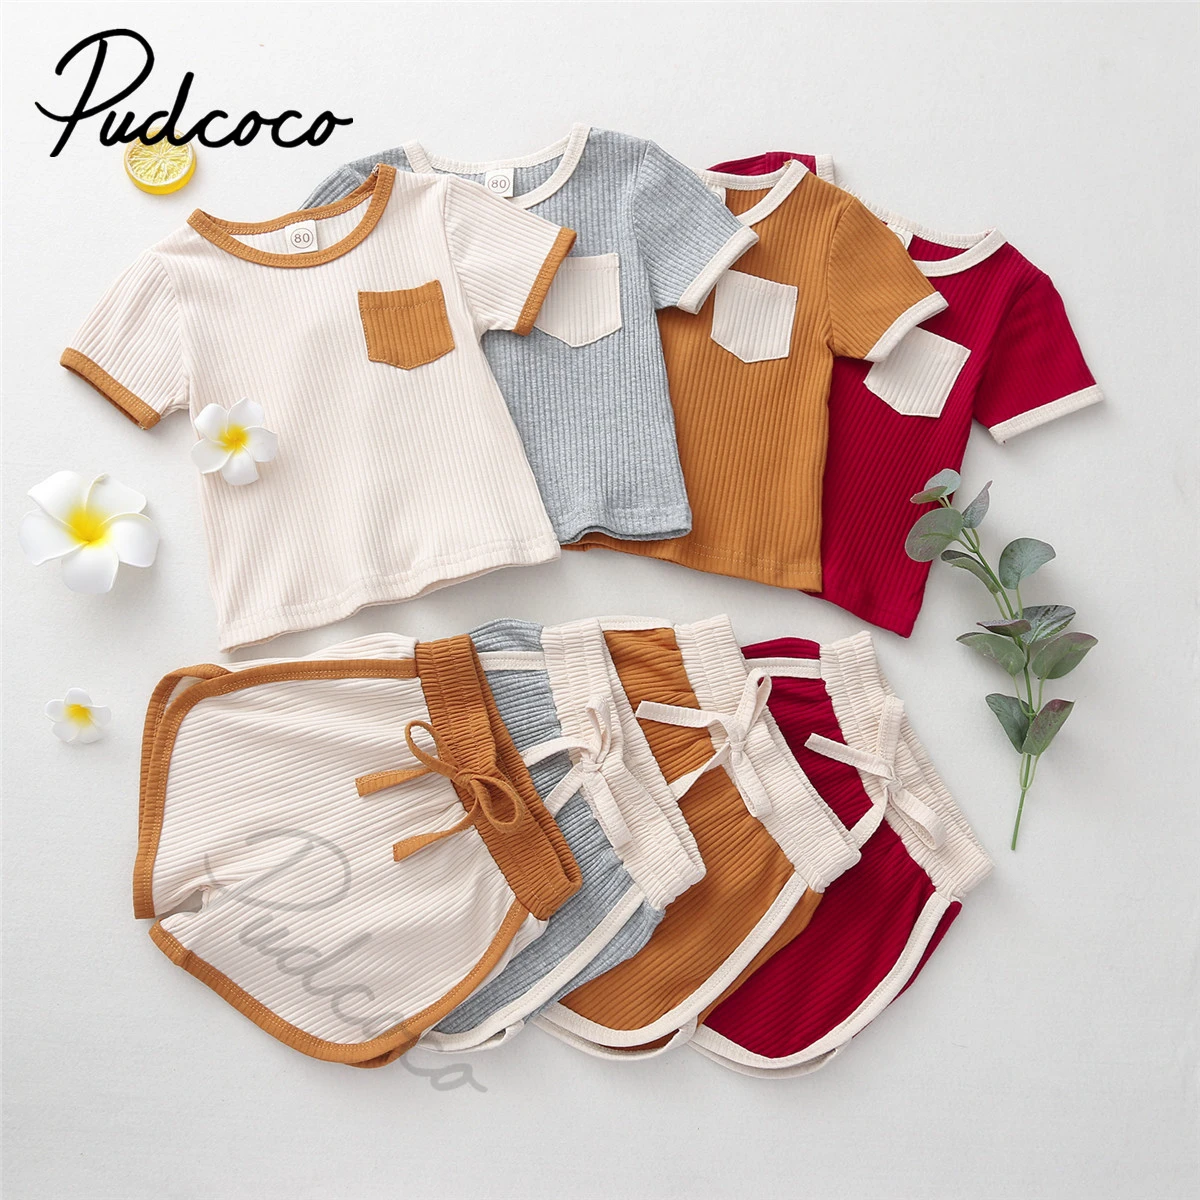 2021 Baby Summer Clothing Kids Baby 2-piece Ribed Outfit Set Short Sleeve Pocket Top+Shorts Set for Children Boys Girls